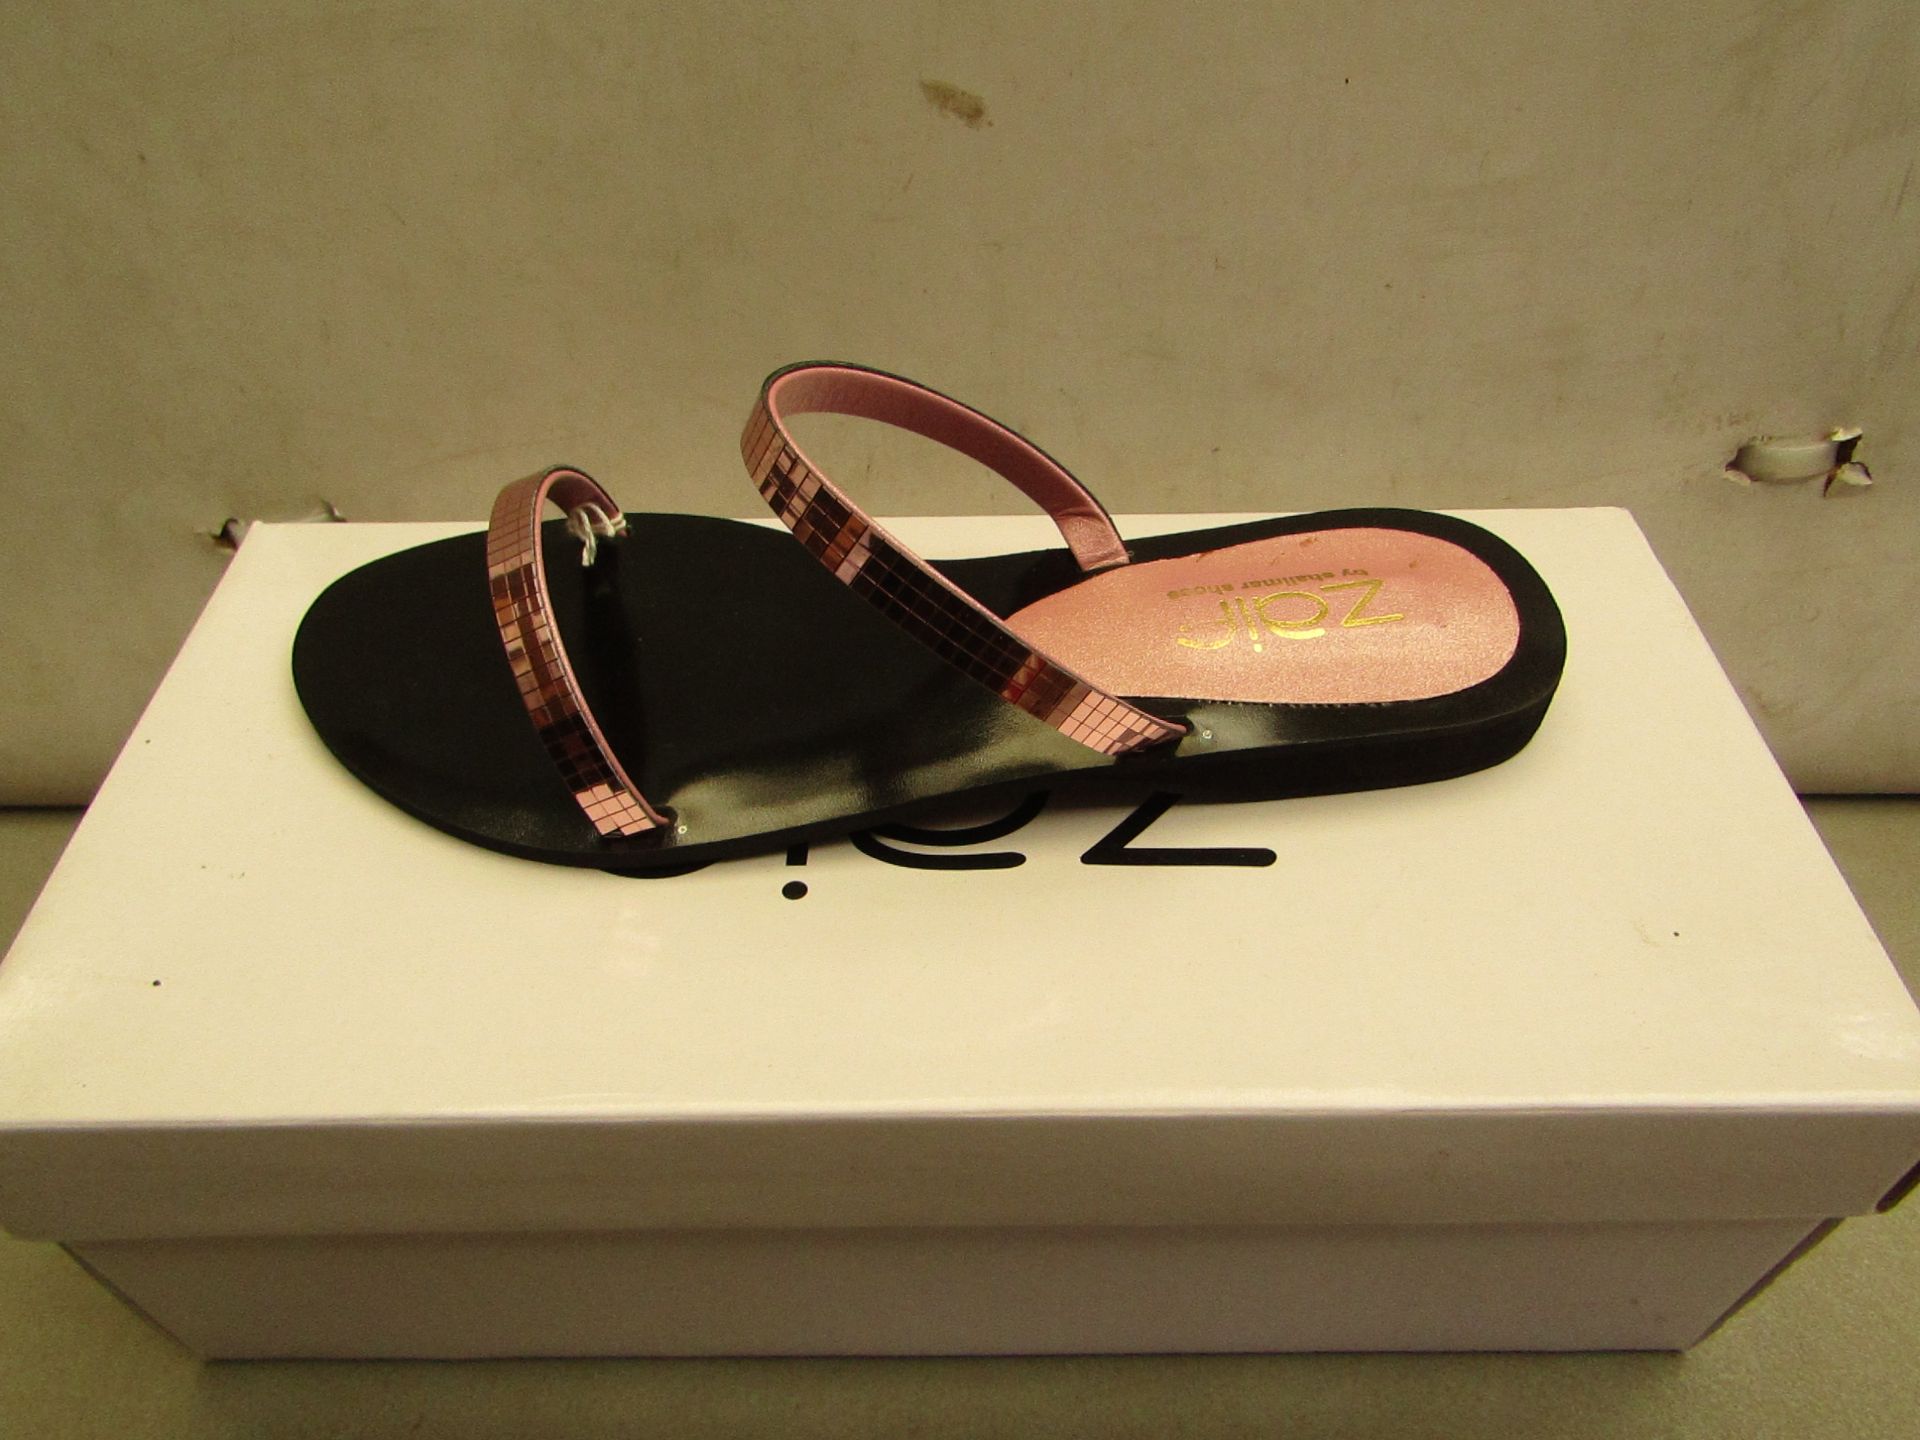 Zaif by Shalamar Ladies Sandals size 4 new & boxed see image for design